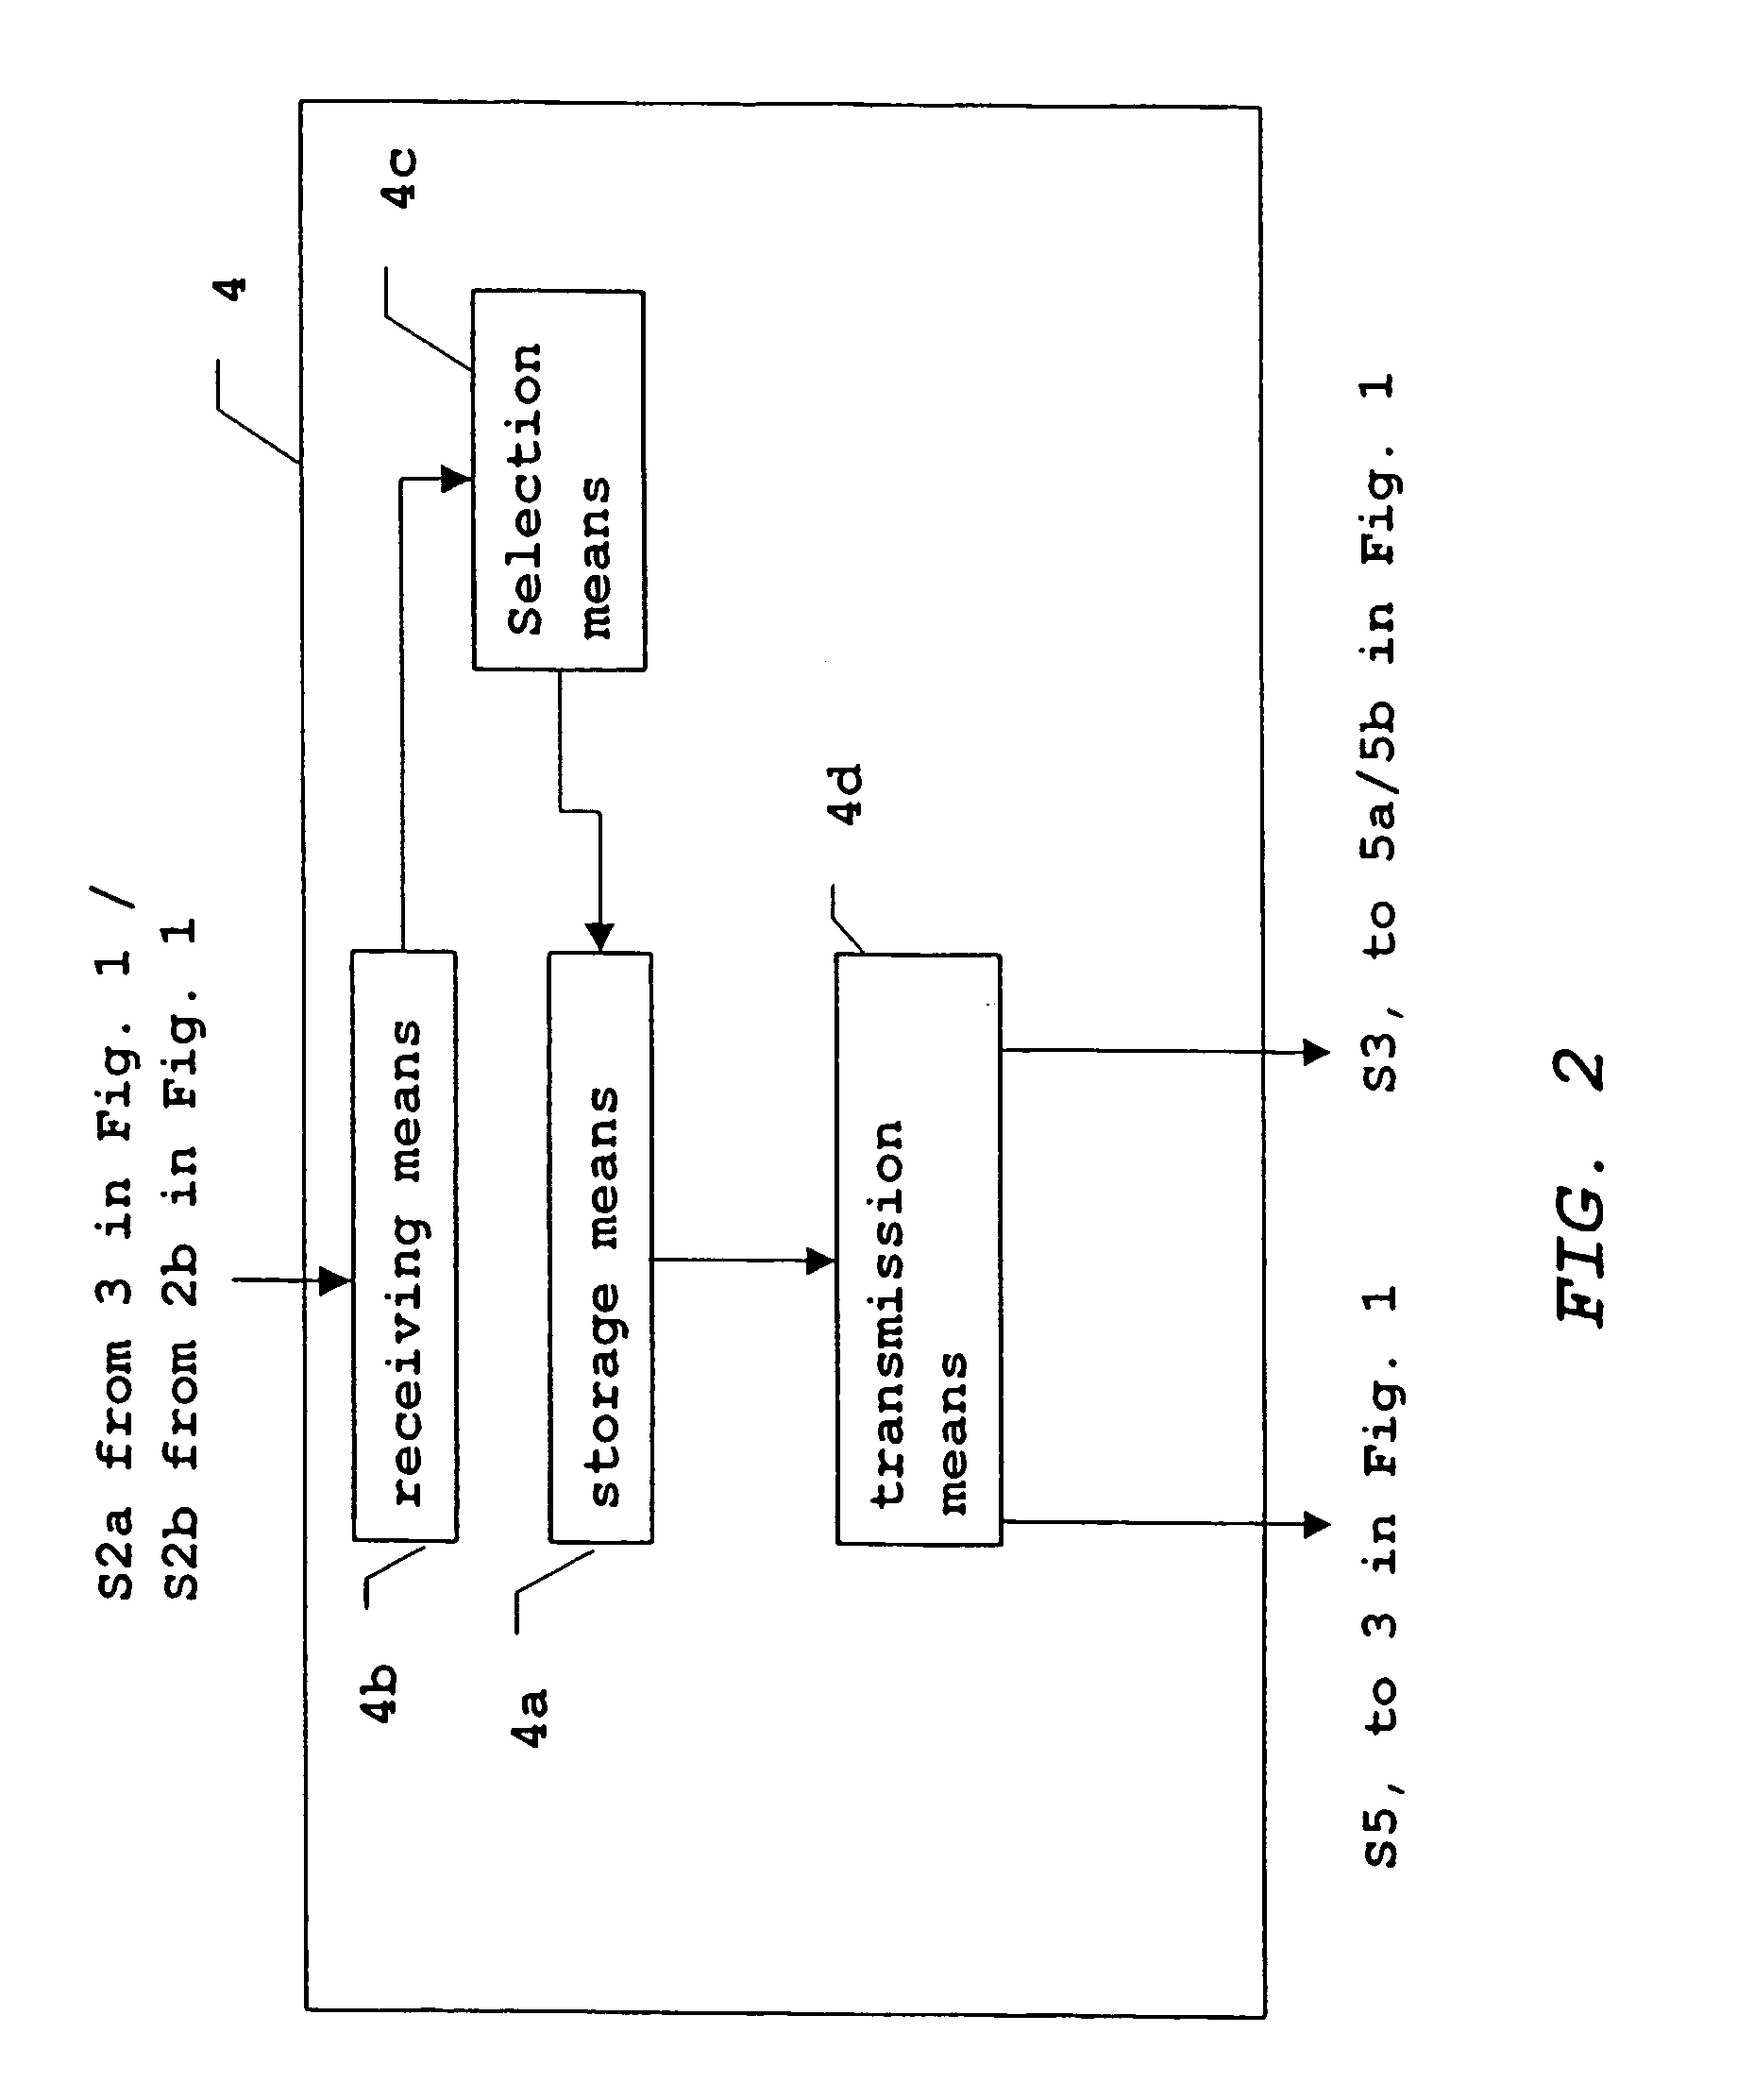 Method for enabling a subscriber entity to actively communicate in a communication network